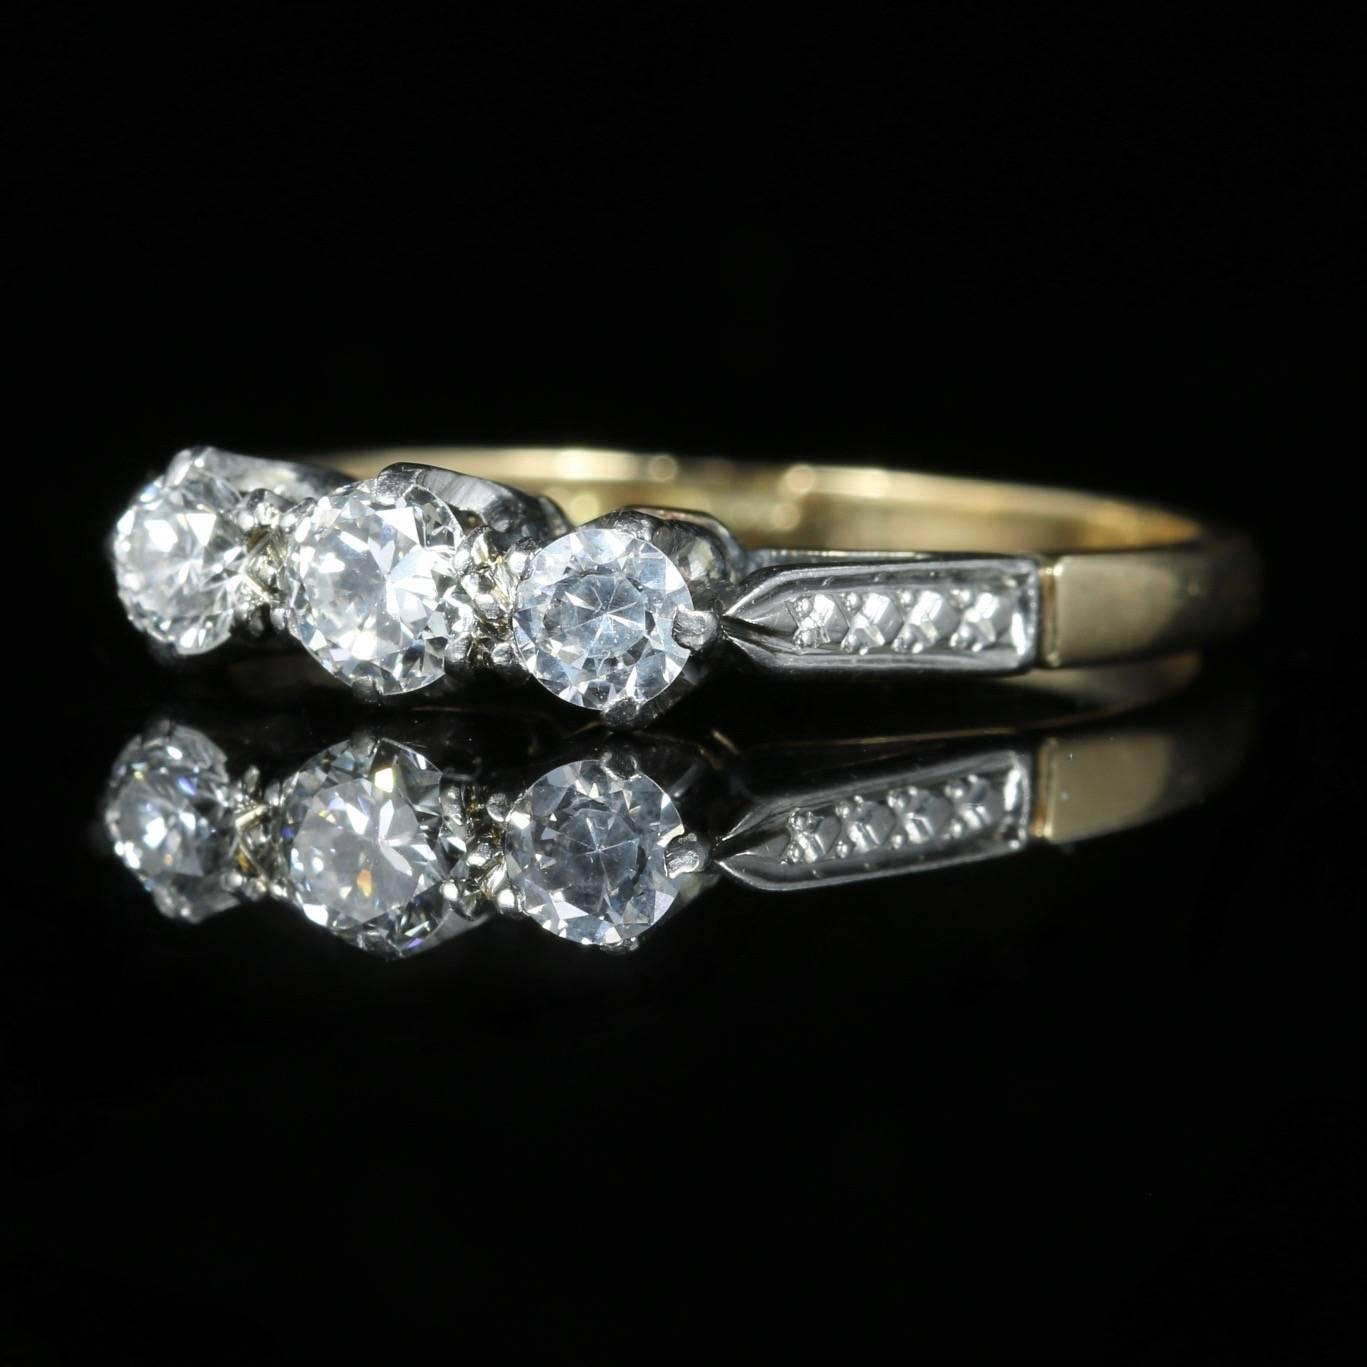 This stunning Antique 18ct yellow Gold and Platinum Diamond trilogy ring boasts a gallery of Diamonds that are all original to the setting.

A lovely Antique Edwardian Victorian Diamond ring.

Circa 1915

It is hallmarked 18ct and Plat.

Set with a